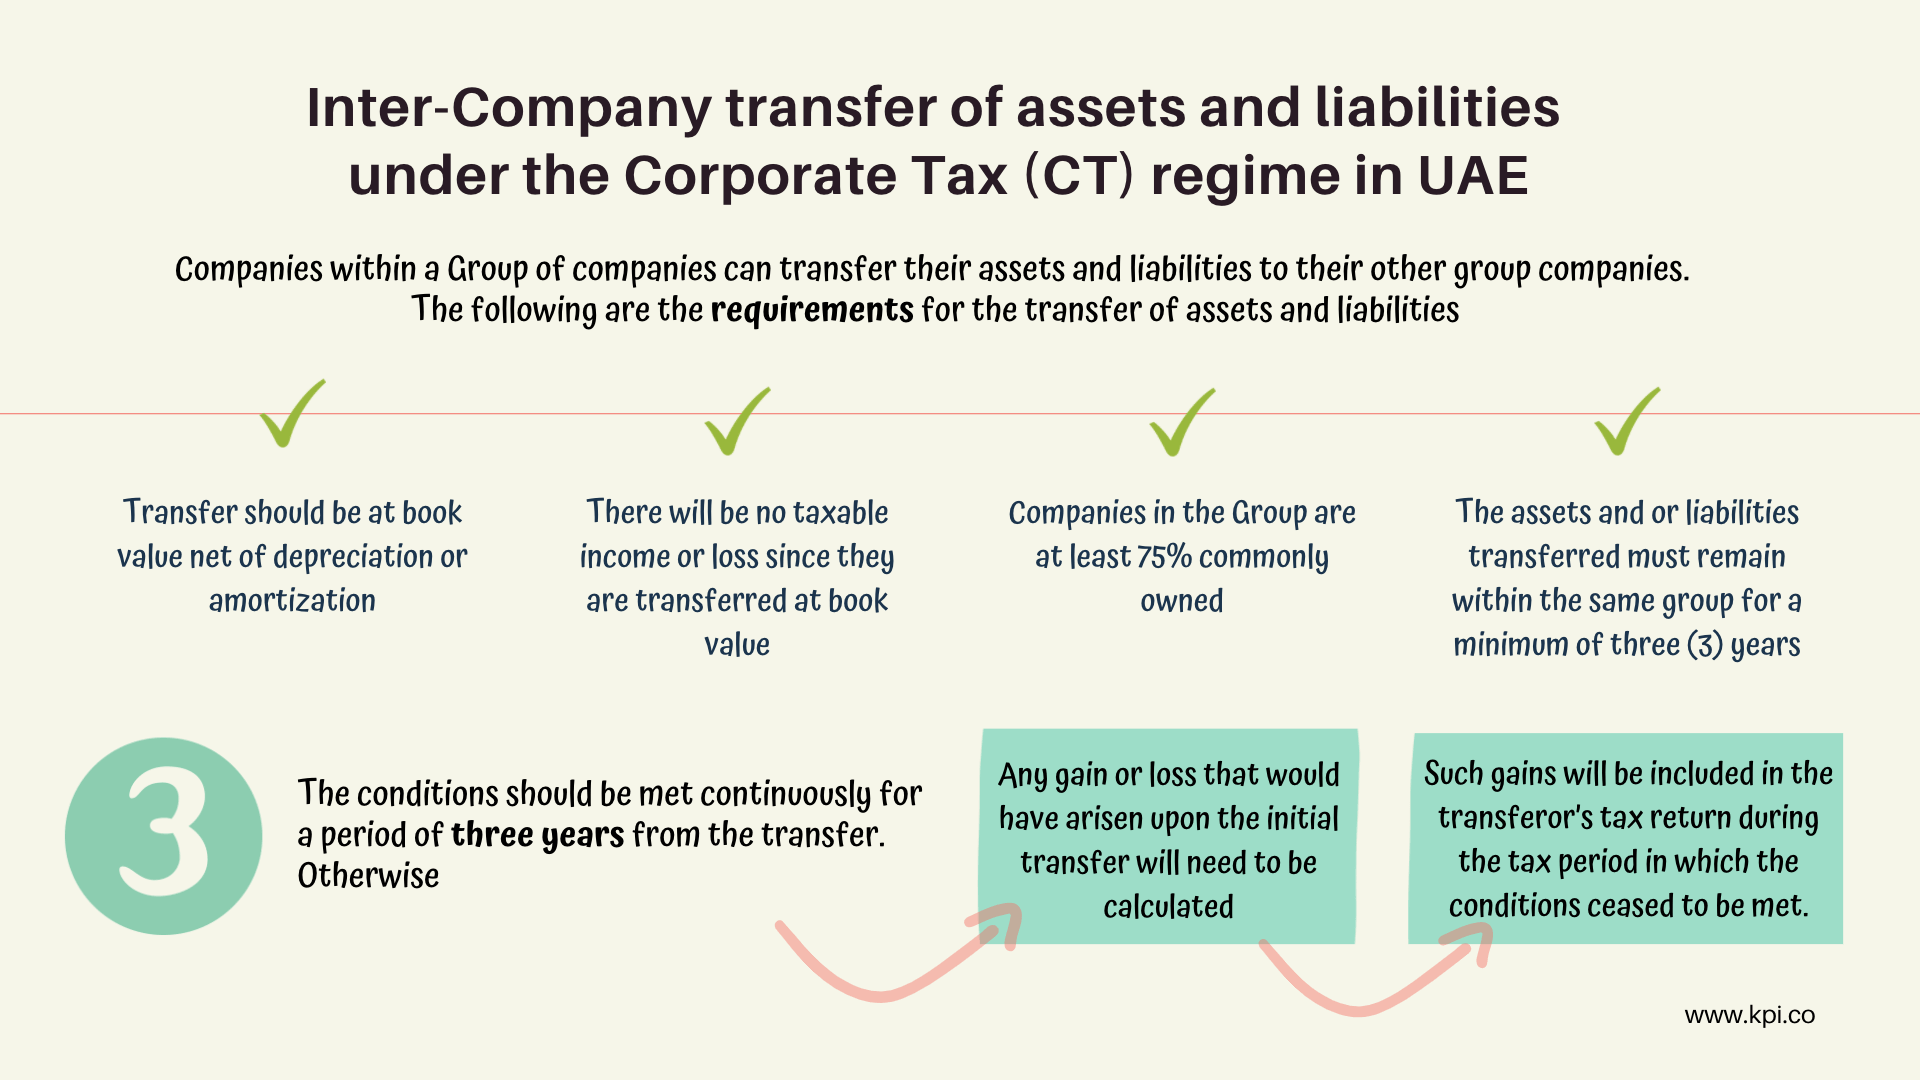 Infographic on requirements for Transfer of Assets and Liabilities in the UAE Corporate Tax regime